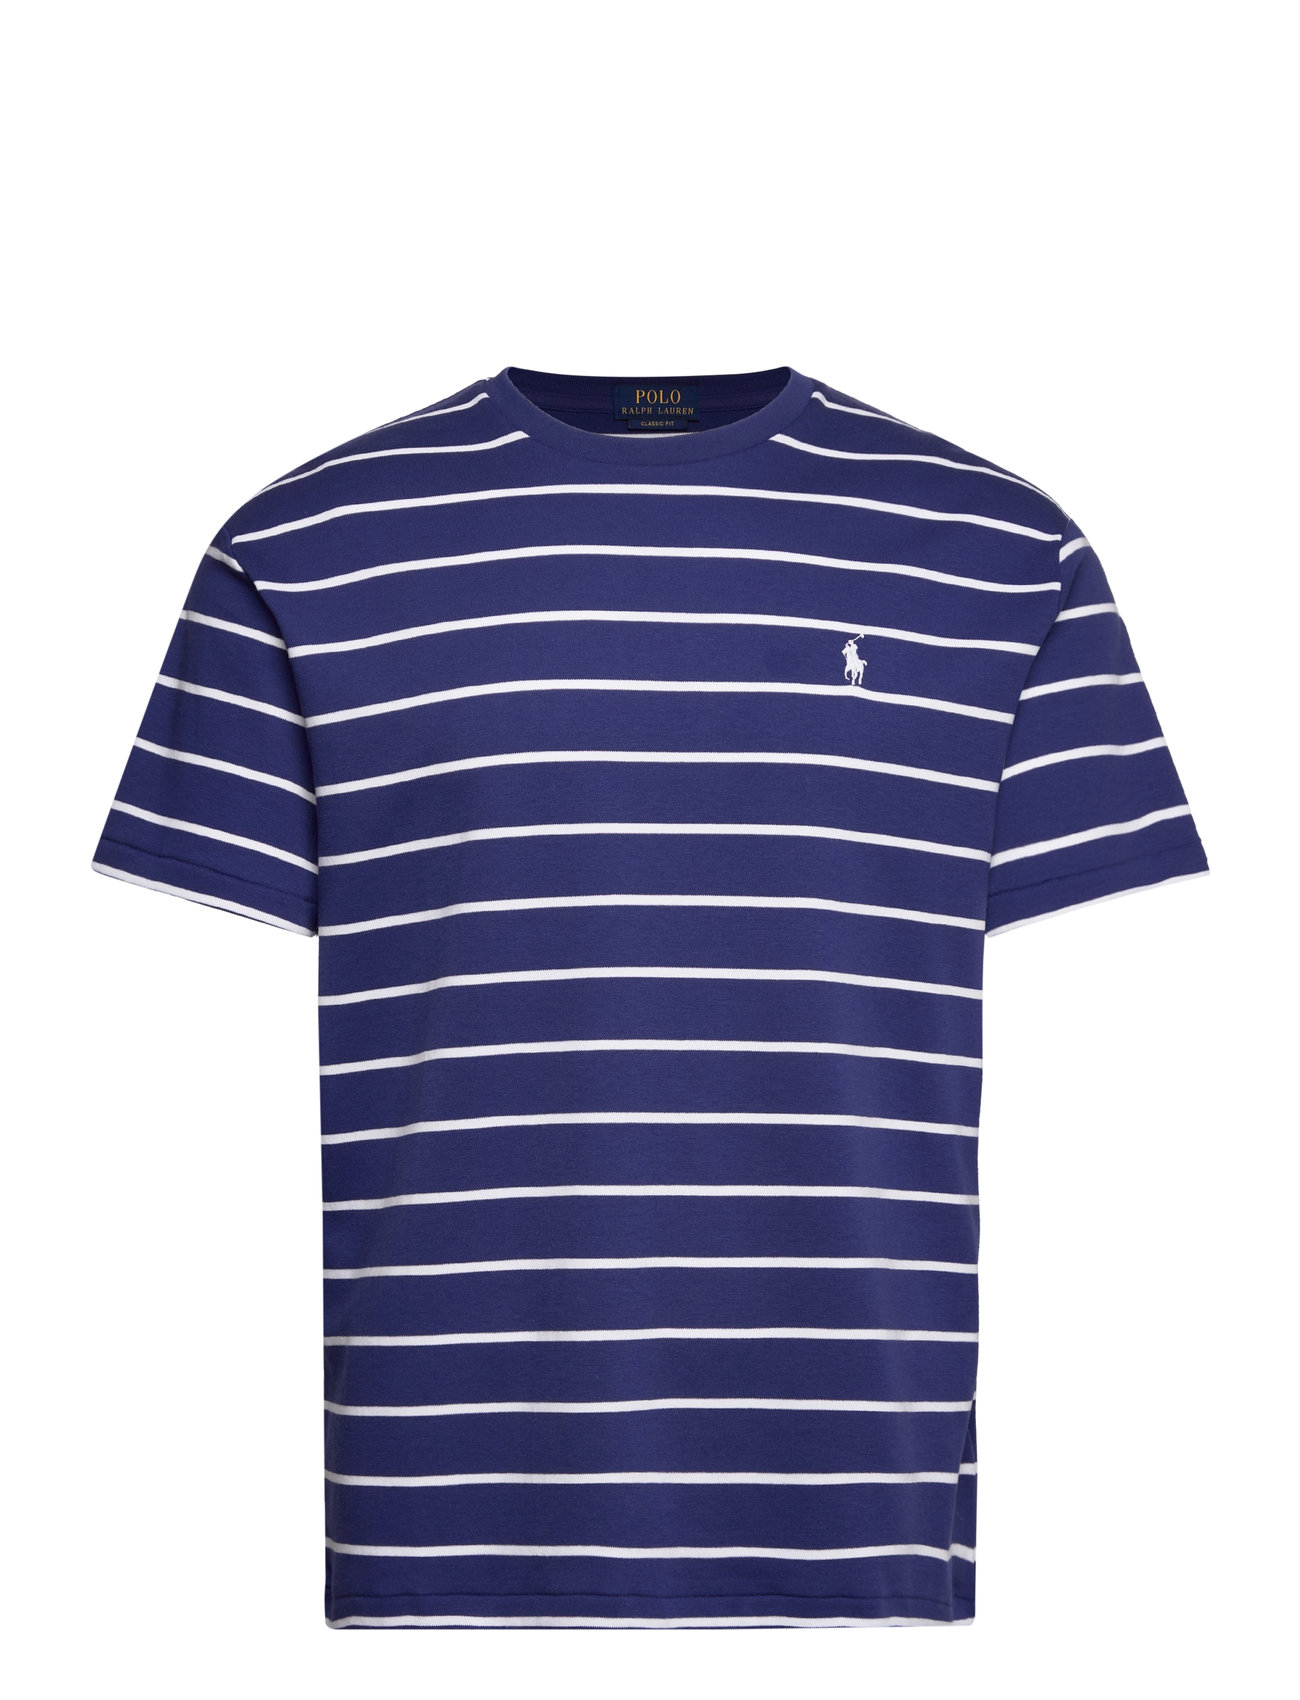 Classic Fit Striped Soft Cotton T-Shirt Tops T-shirts Short-sleeved Navy Polo Ralph Lauren